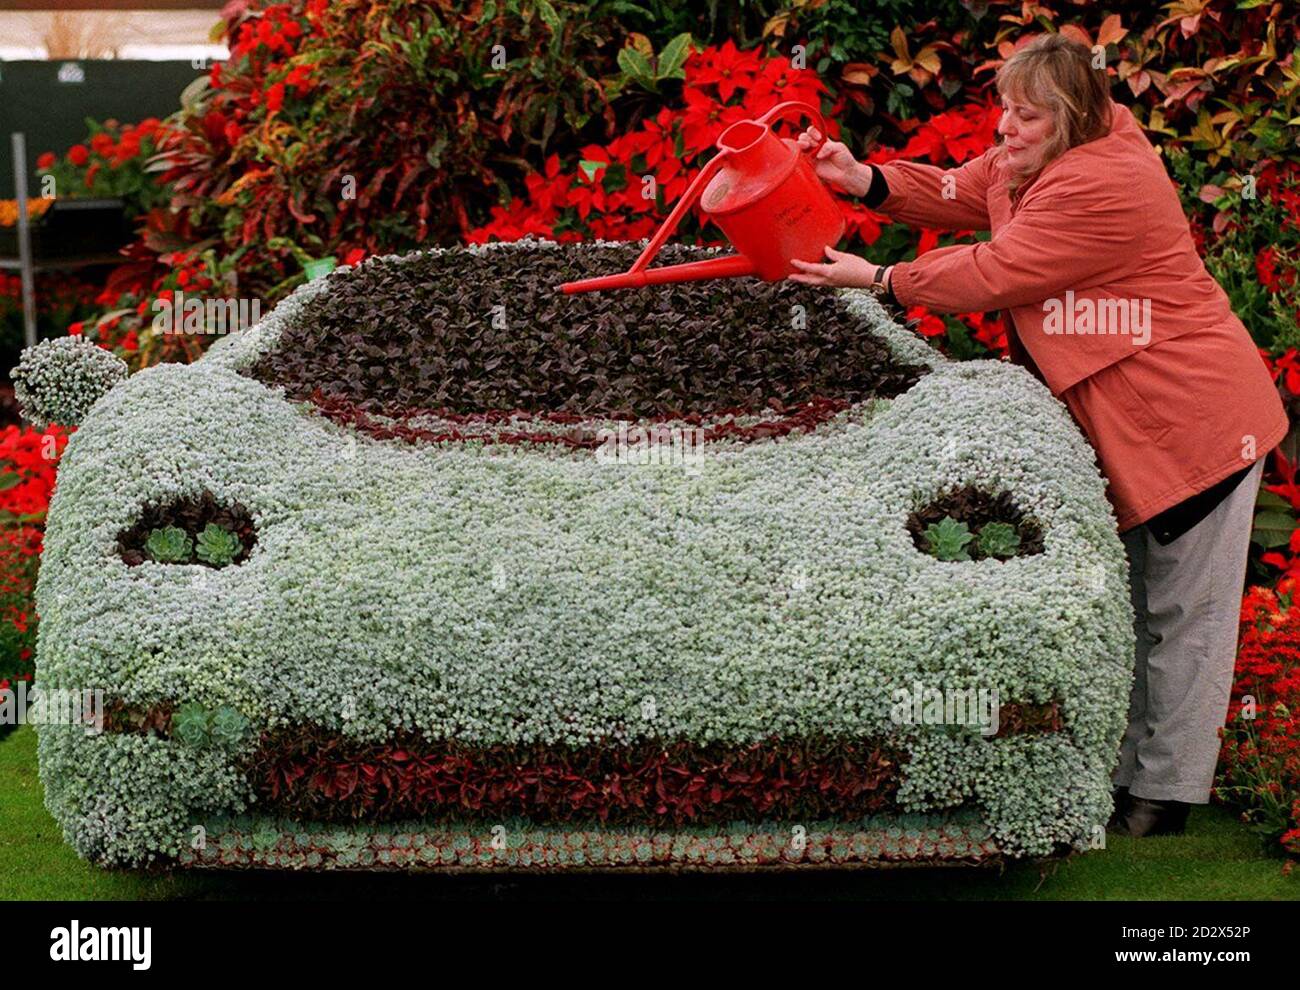 Averill Cooke waters a flower model of the Jaguar XJ220 ahead of tomorrow's Chelsea Flower Show in London. The model was created using a steel frame covered with capillary matting and a layer of compost. The frame was then mossed and covered with chicken wire before 10,000 silver sedum carpet bedding plants were individually planted by hand into each chicken wire cell. Stock Photo